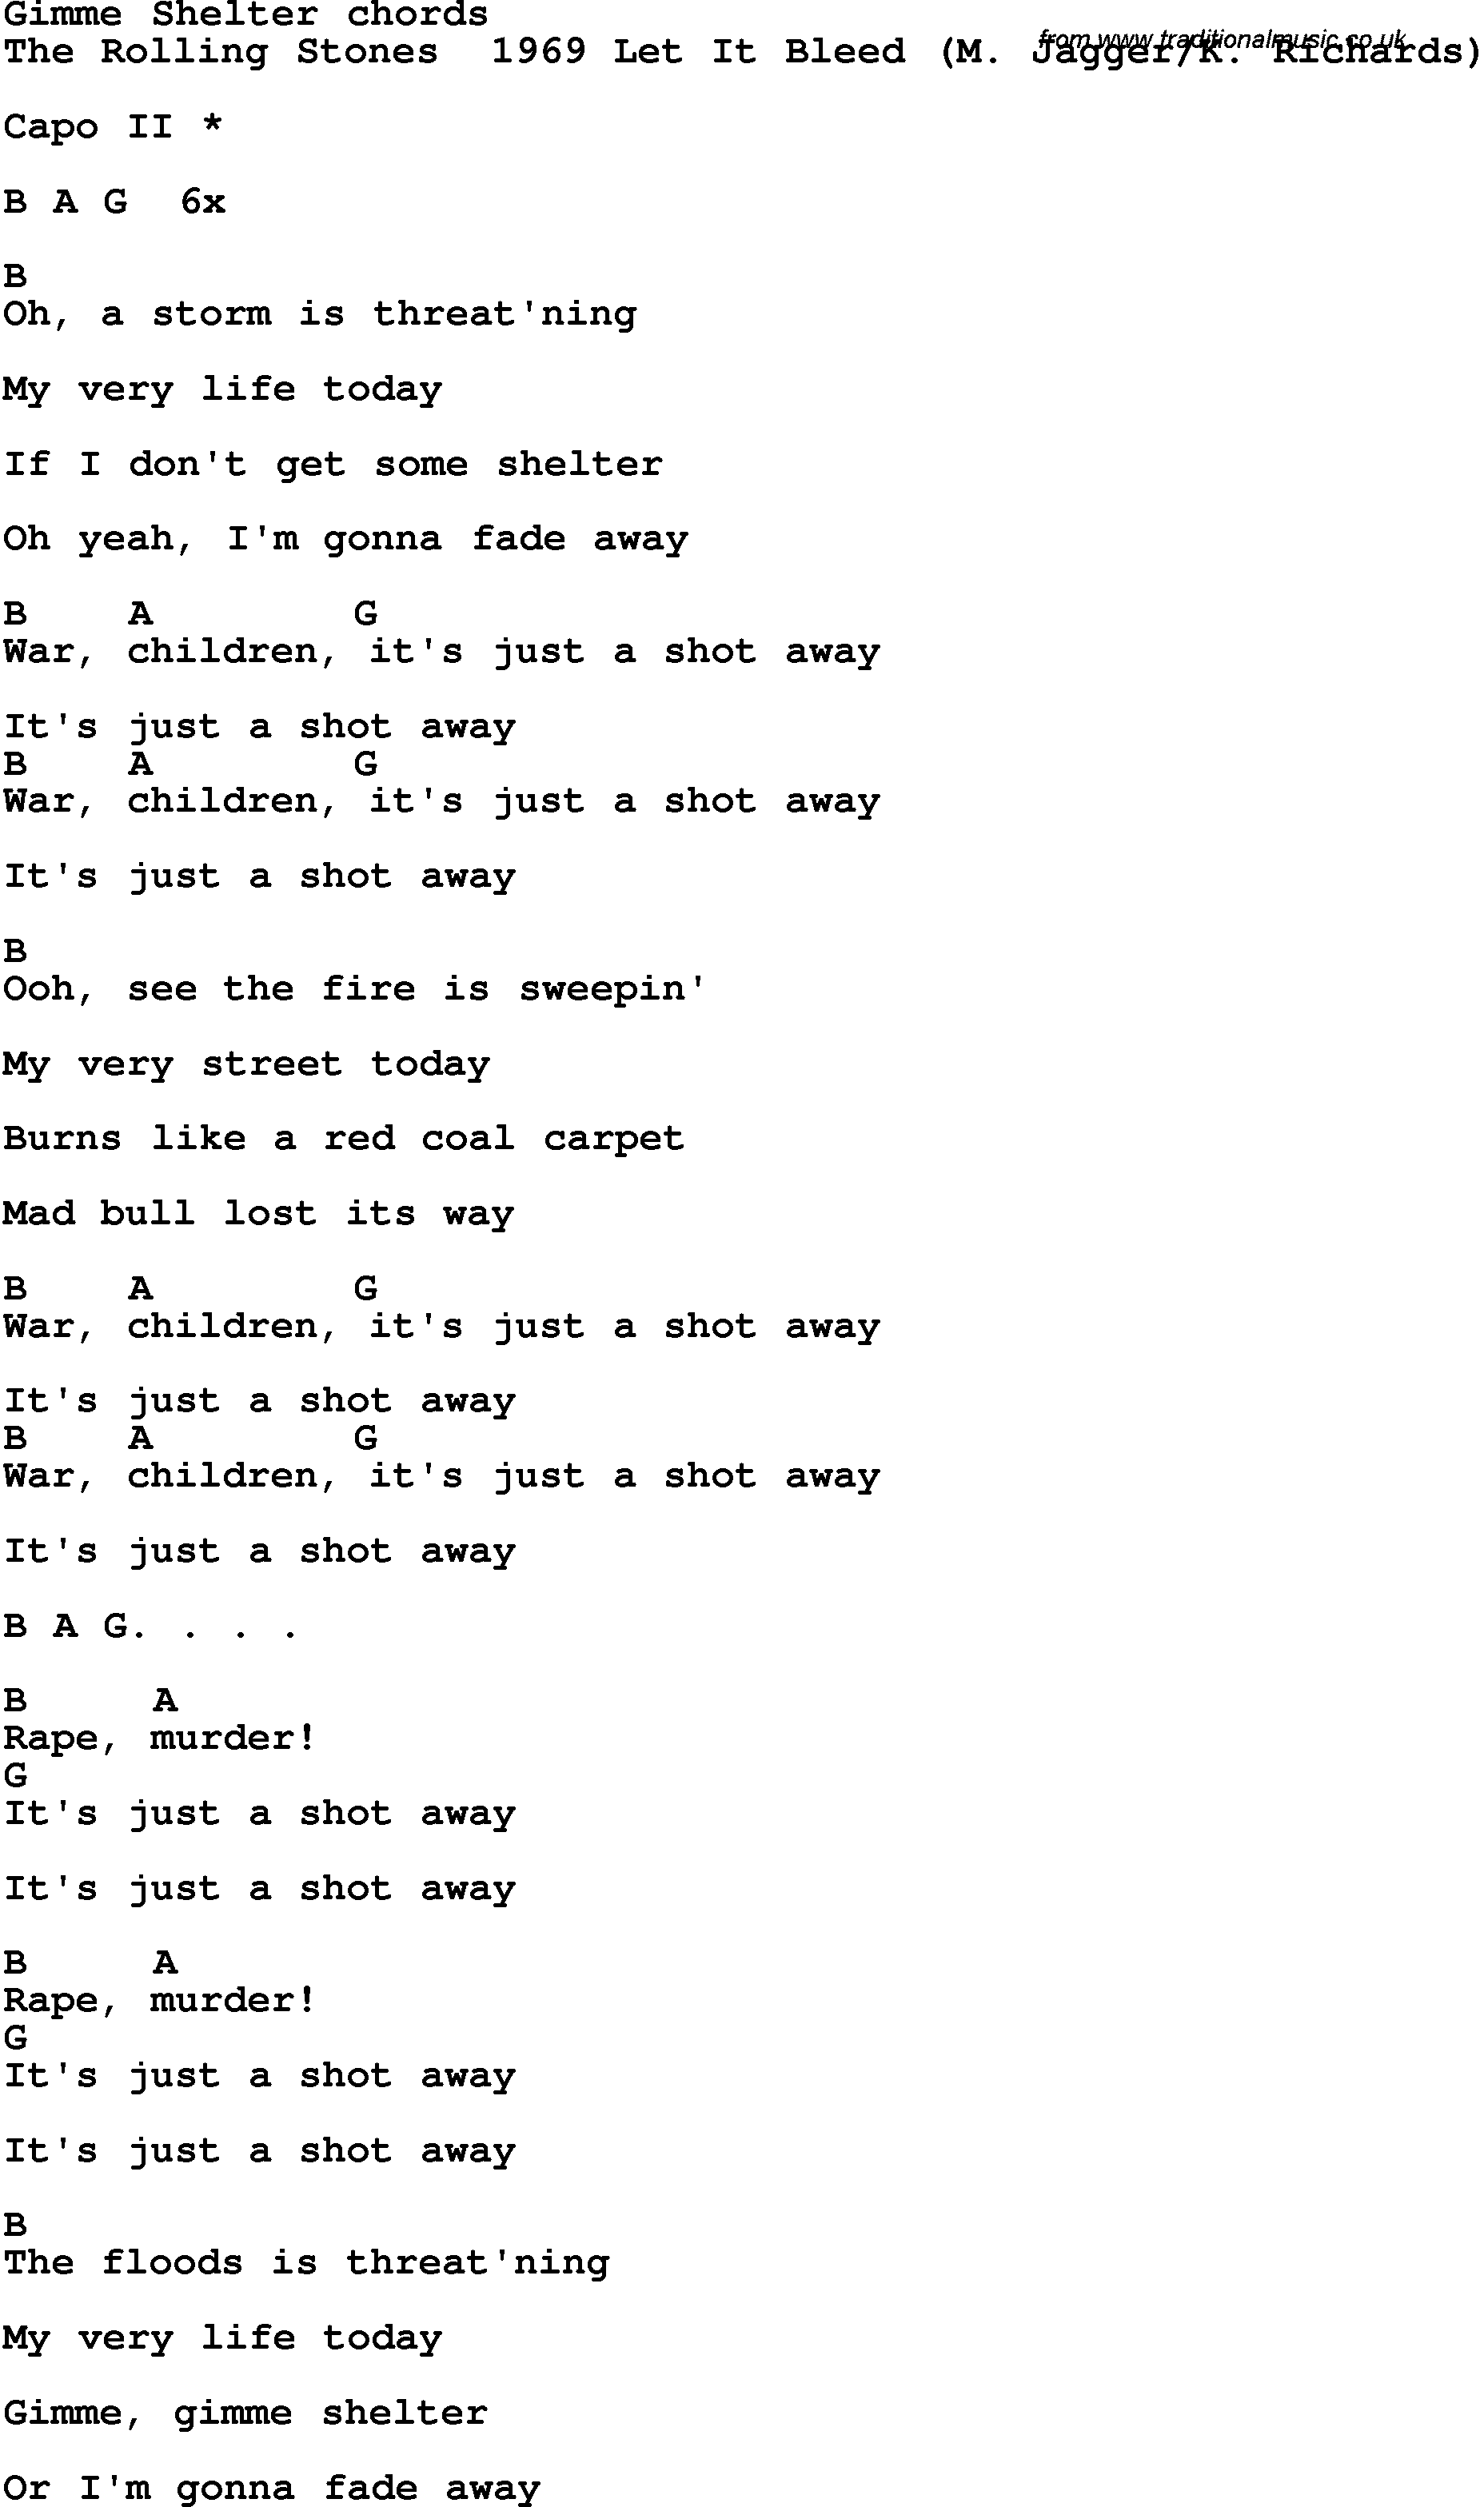 Song Lyrics with guitar chords for Gimme Shelter